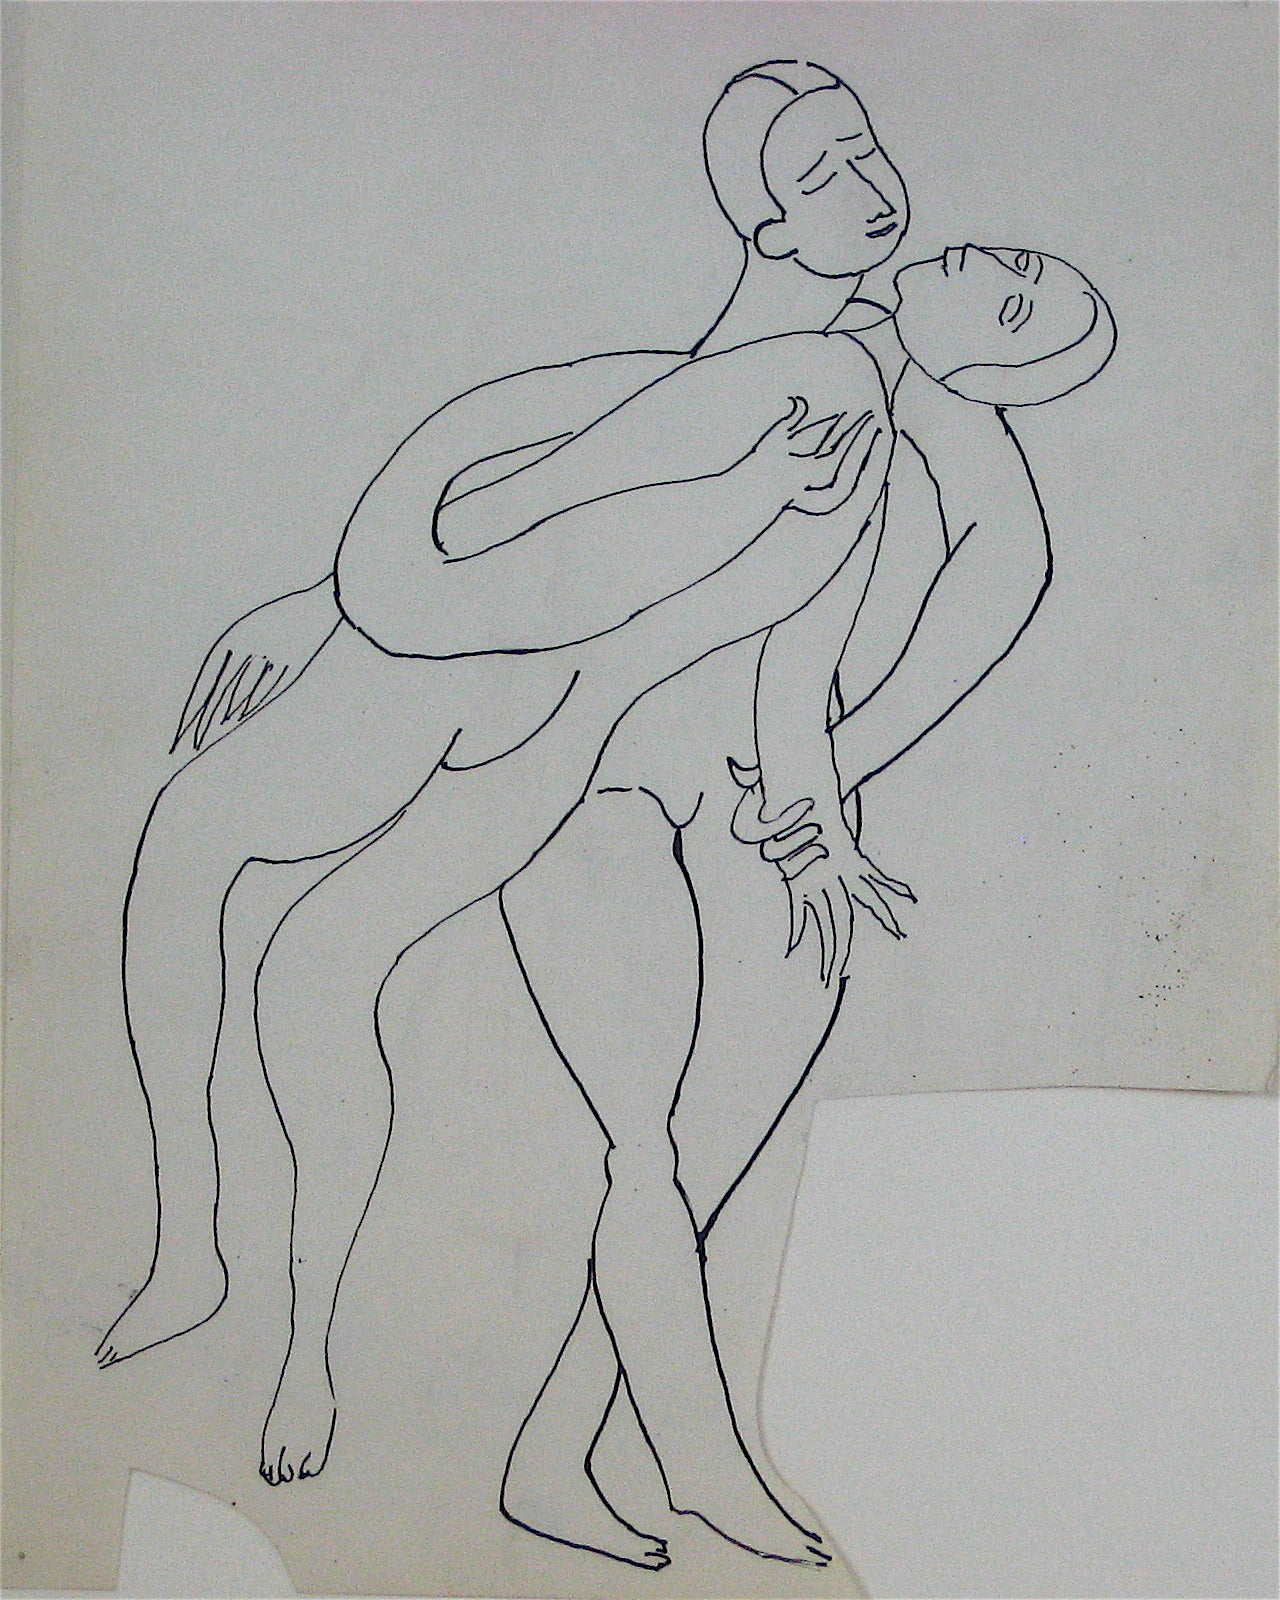 Abstracted Nude Figures Entwined <br>Early 20th Century Ink on Paper <br><br>#11230